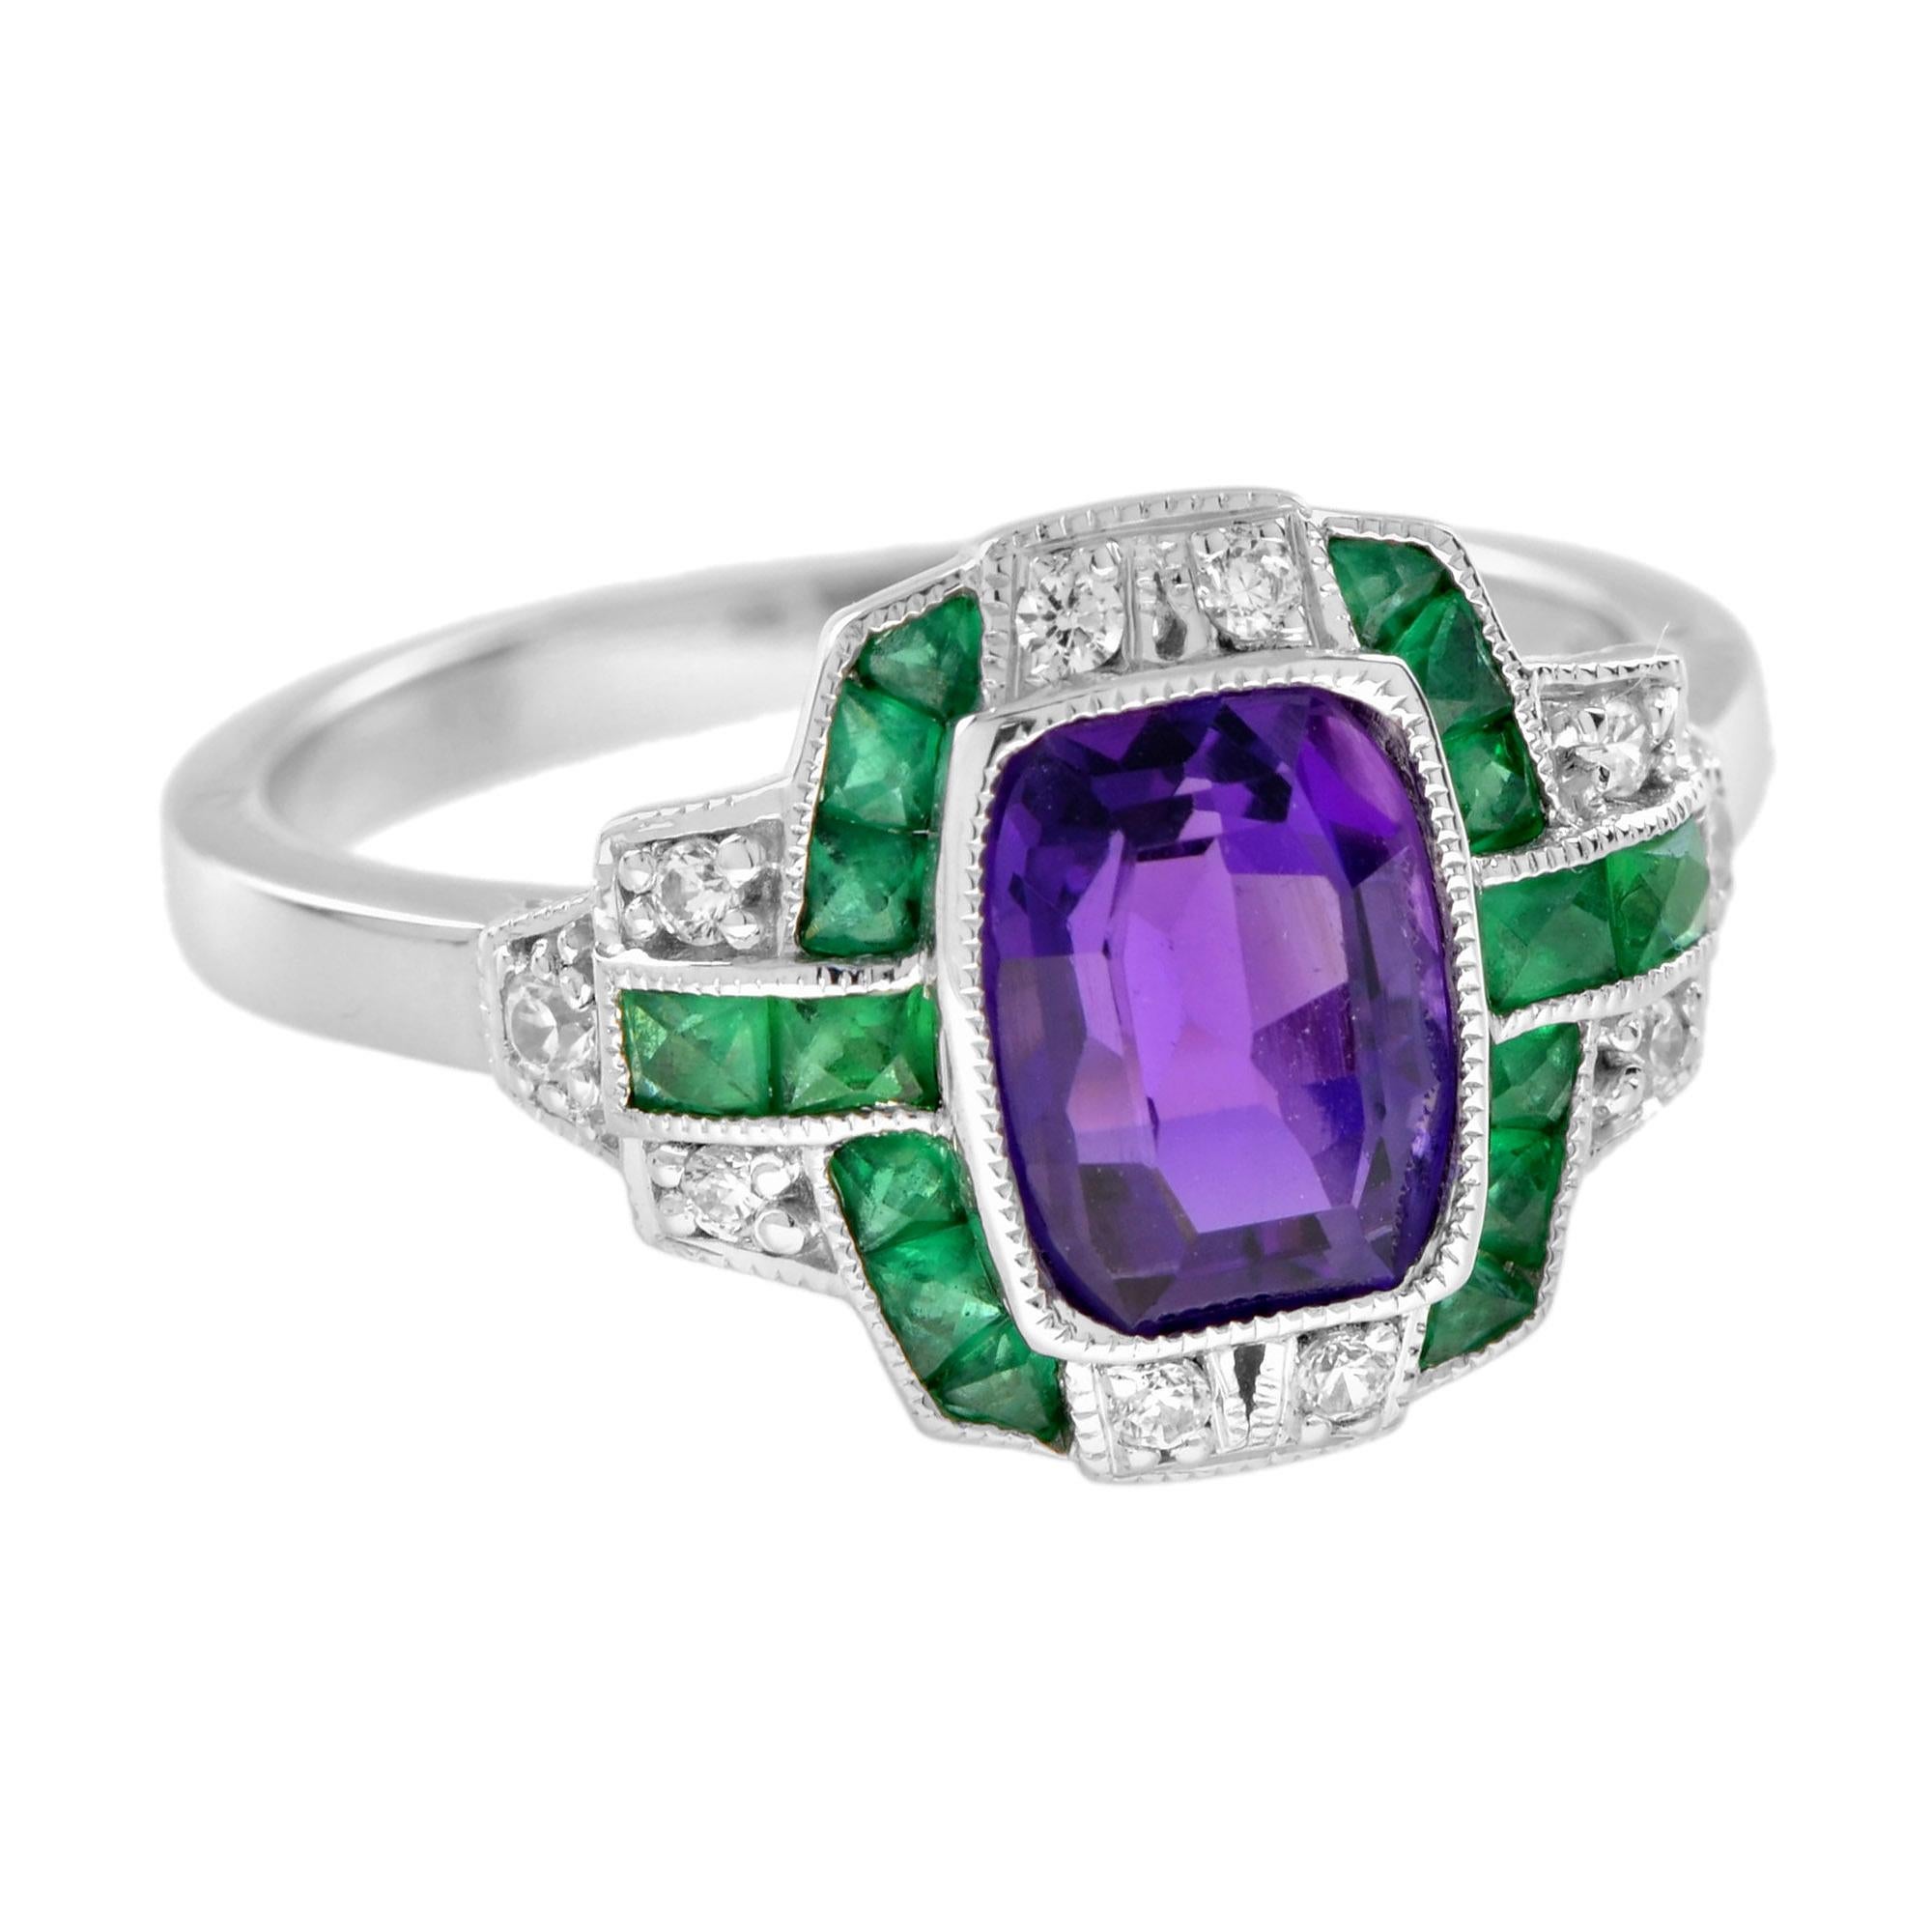 Cushion Cut Amethyst Emerald Diamond Art Deco Style Ring in 14K White Gold For Sale